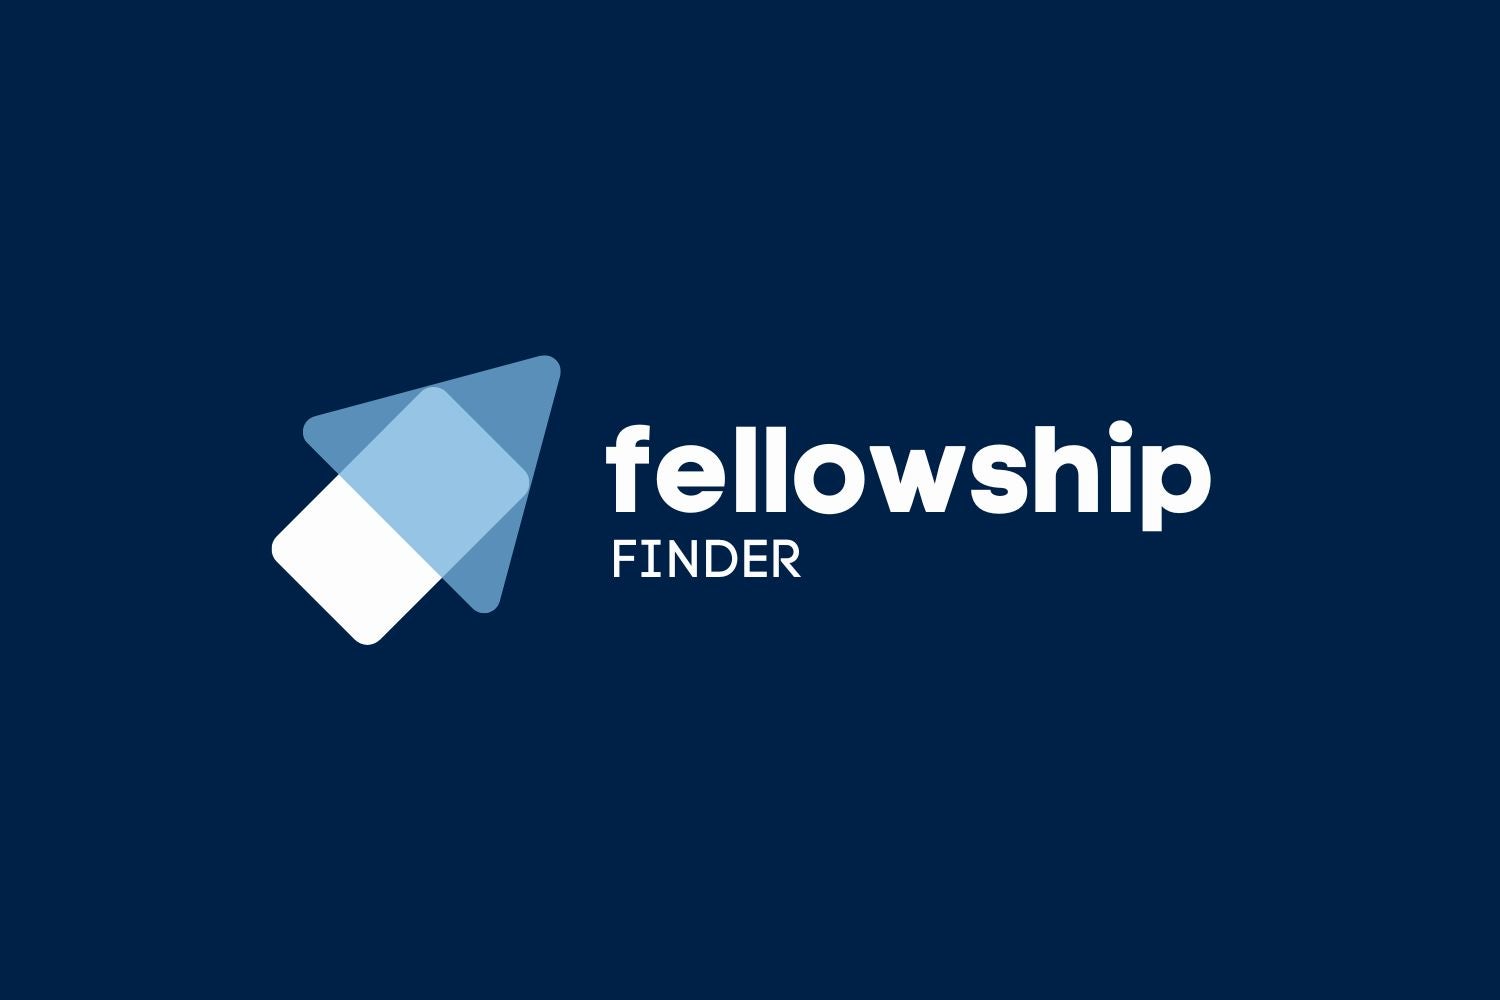 Fellowship Finder graphic